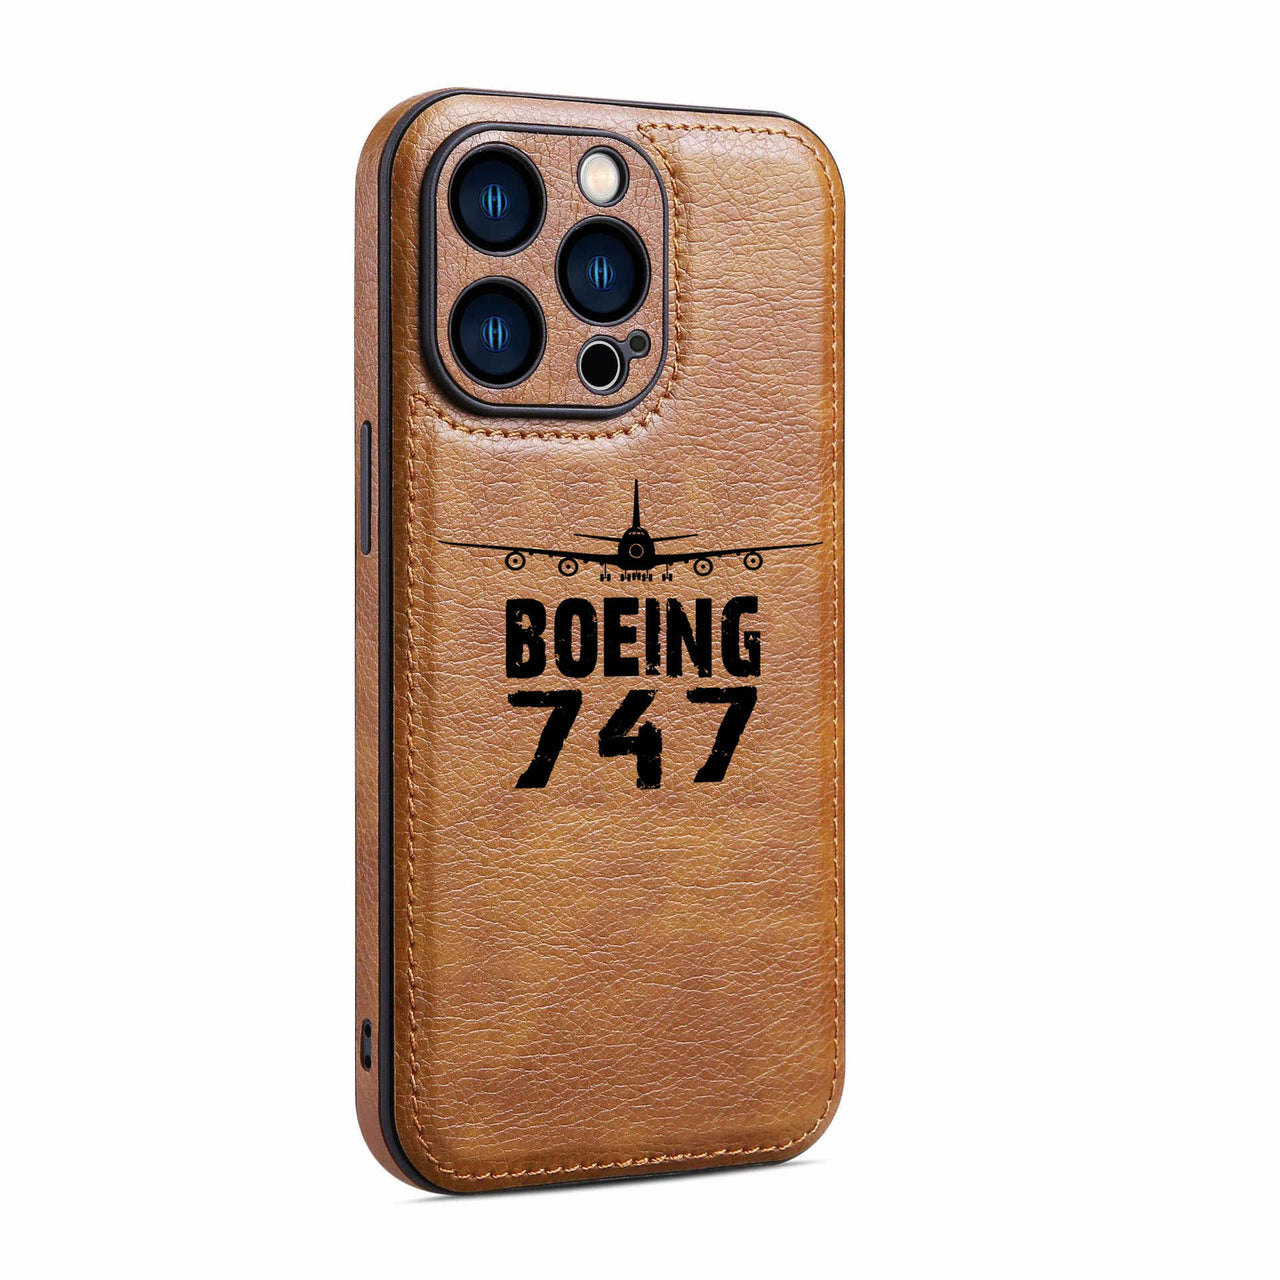 Boeing 747 & Plane Designed Leather iPhone Cases